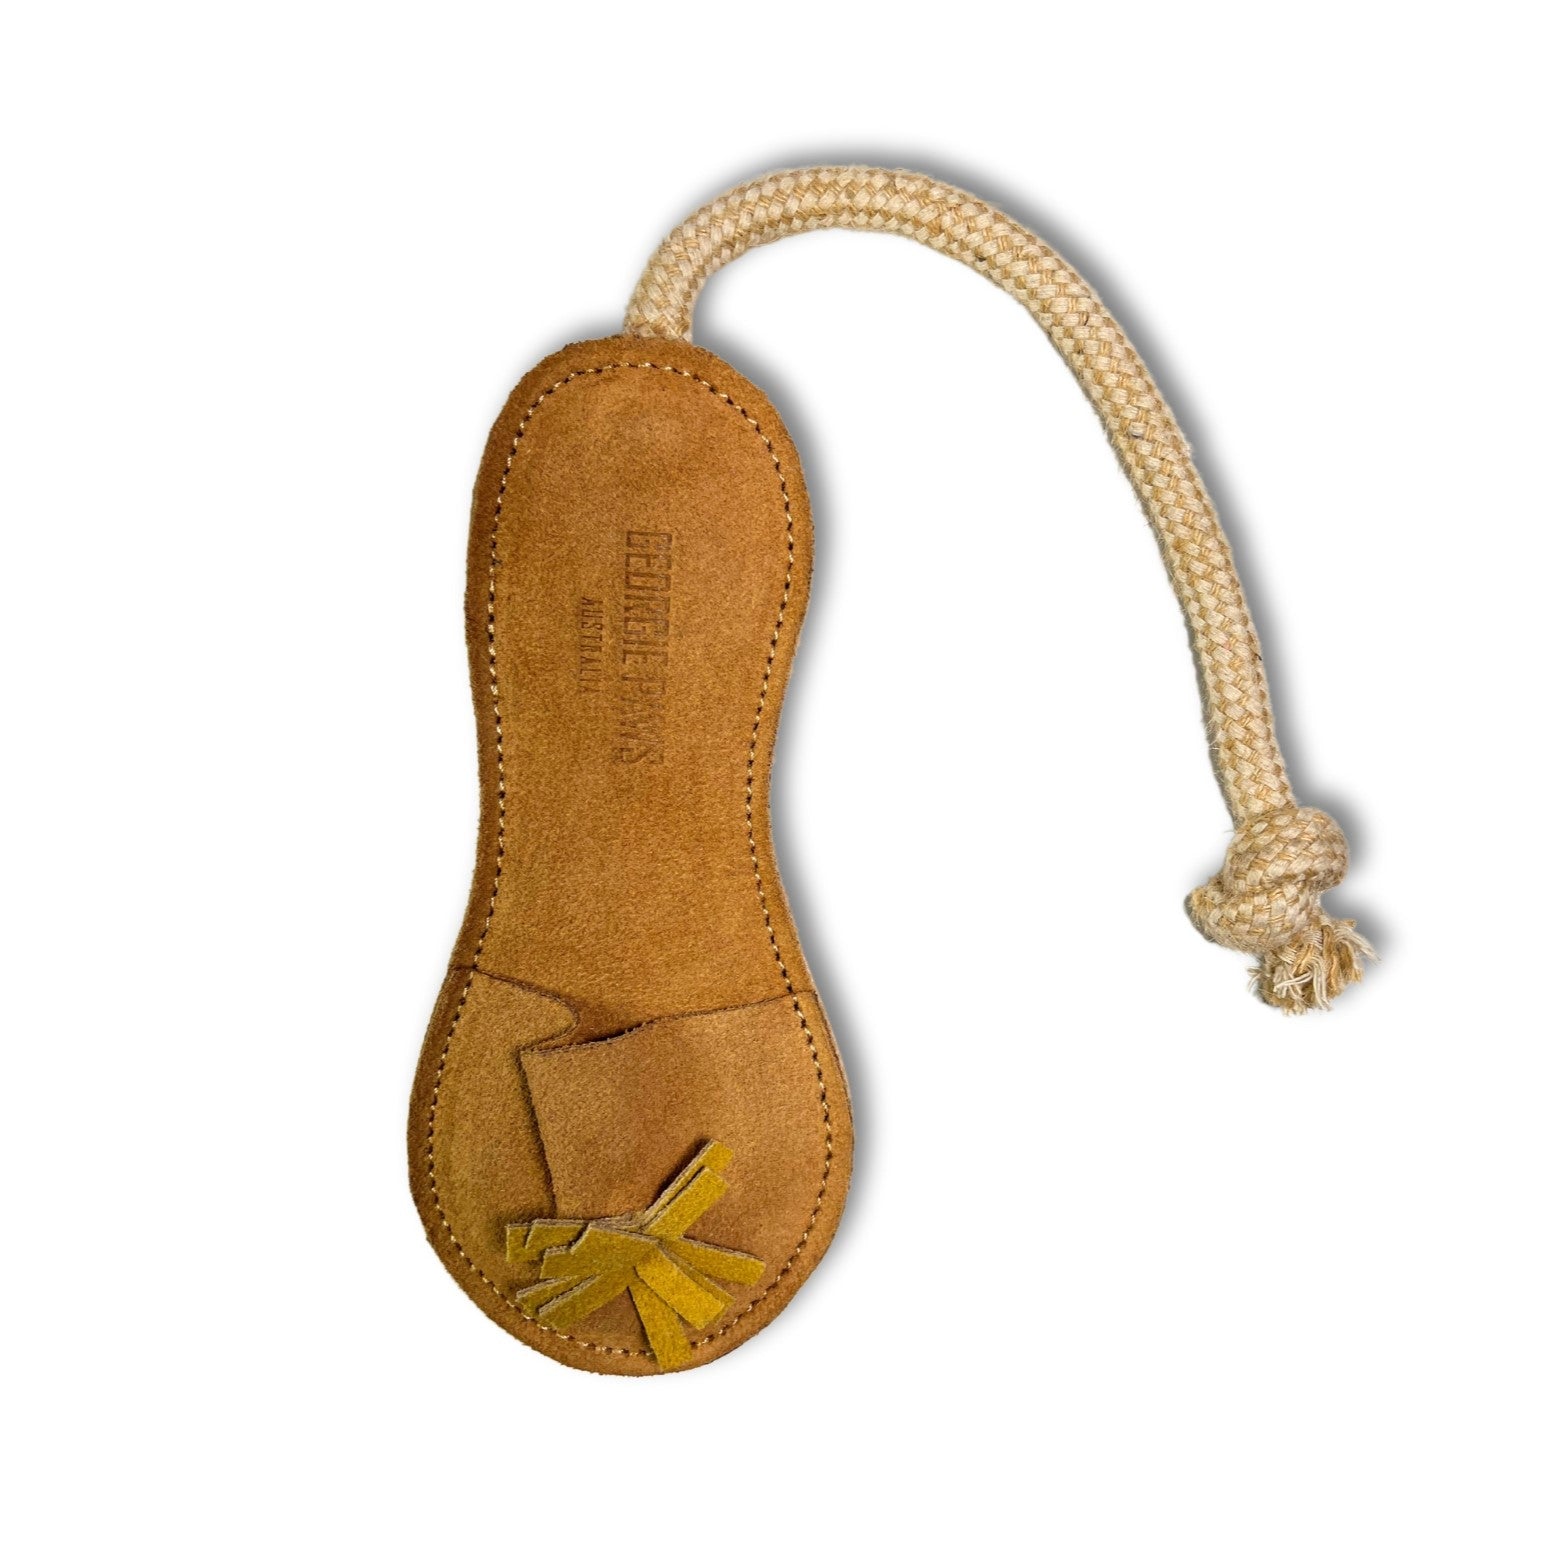 A Georgie Paws Sigrid Slipper-shaped cat toy with a cream-colored, knotted cotton rope tug attached, featuring embossed detailing and a contrasting color on the inner sole.